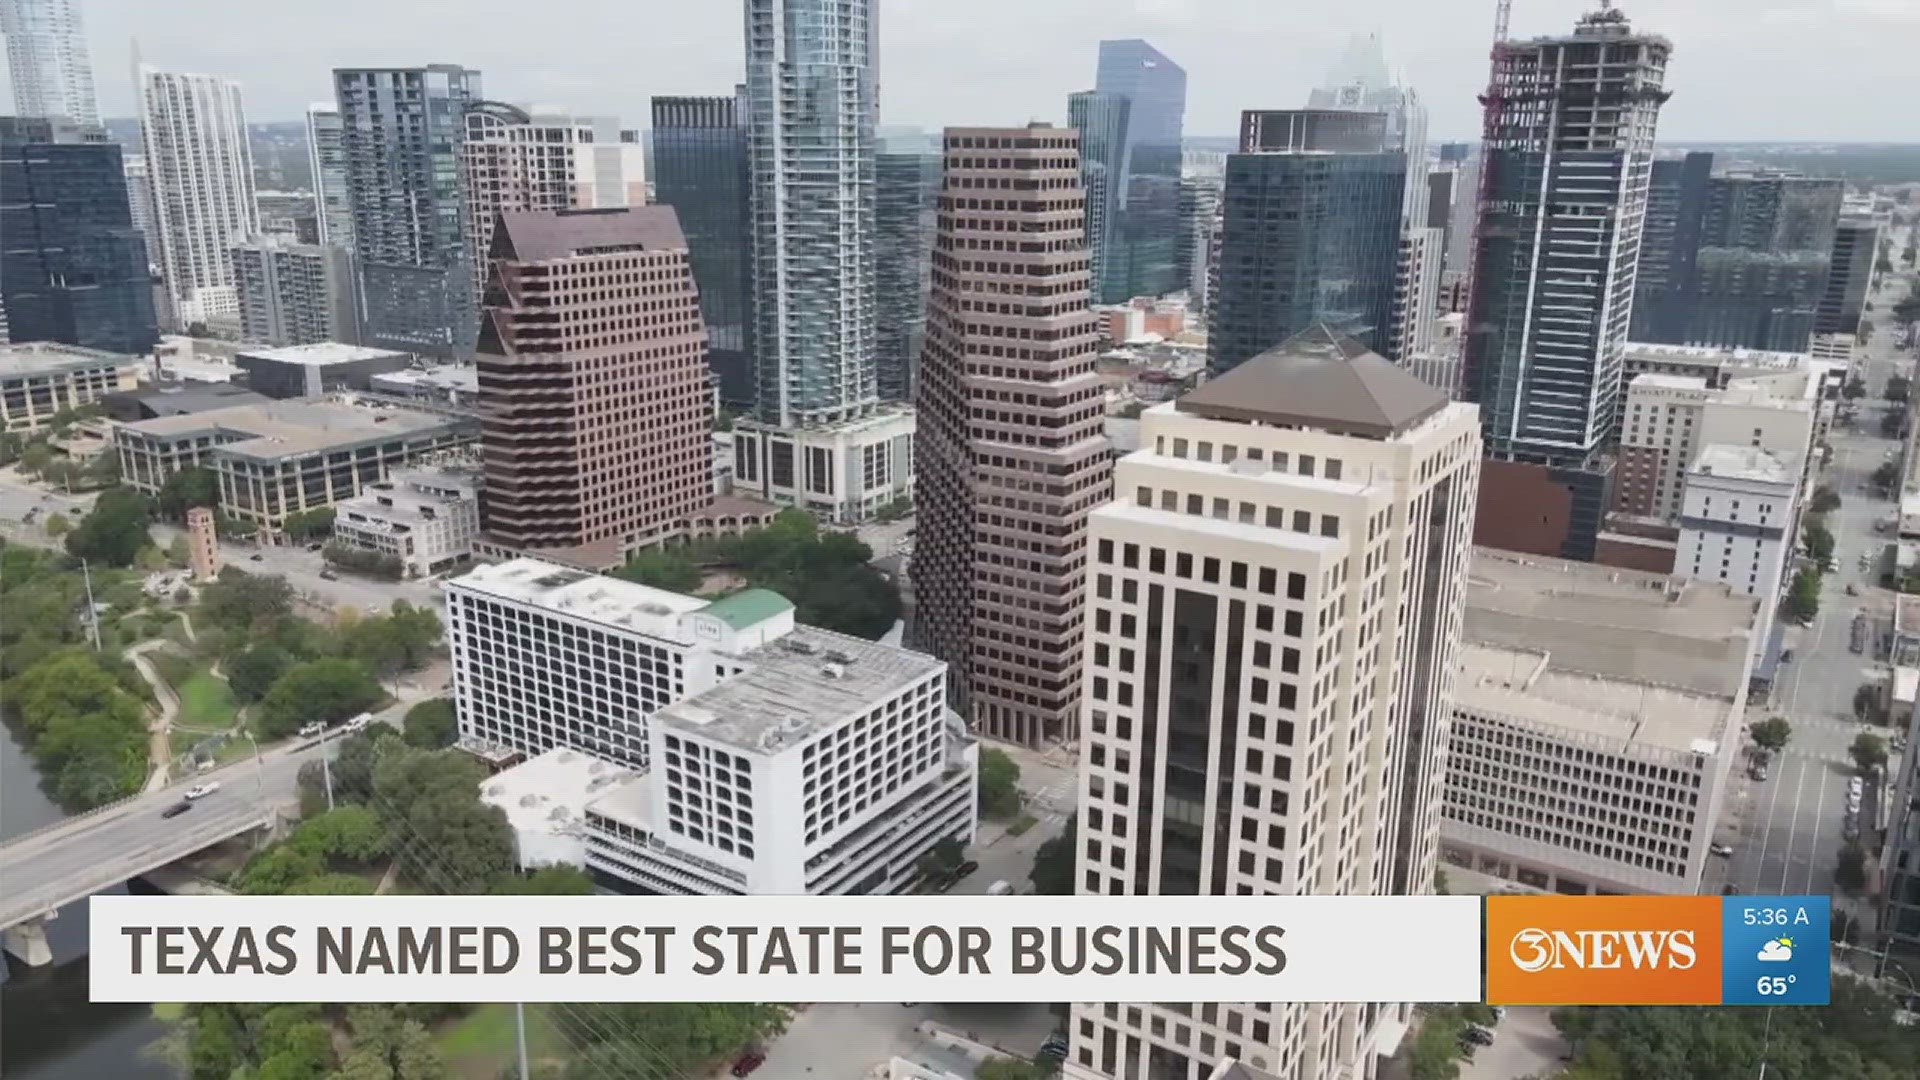 This is the 19th year that the Lone Star State has been named best for business.